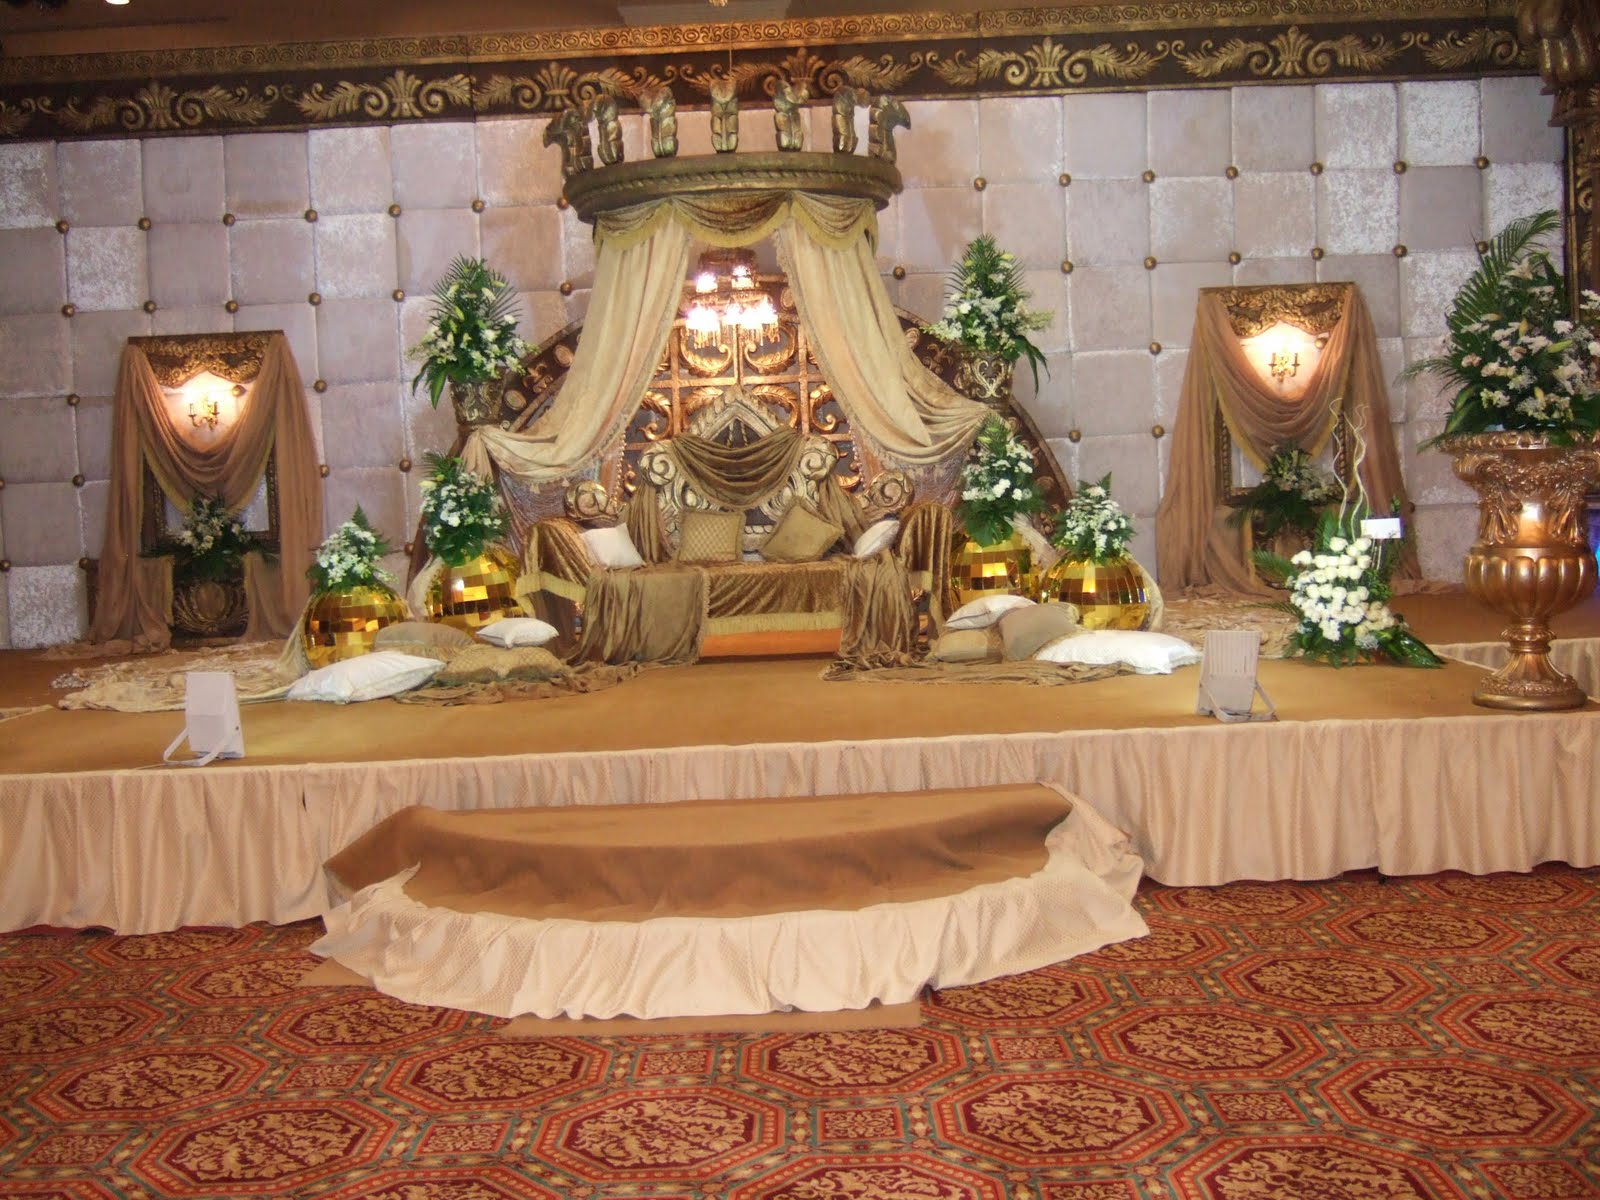 about marriage  marriage  decoration  photos 2013 marriage  